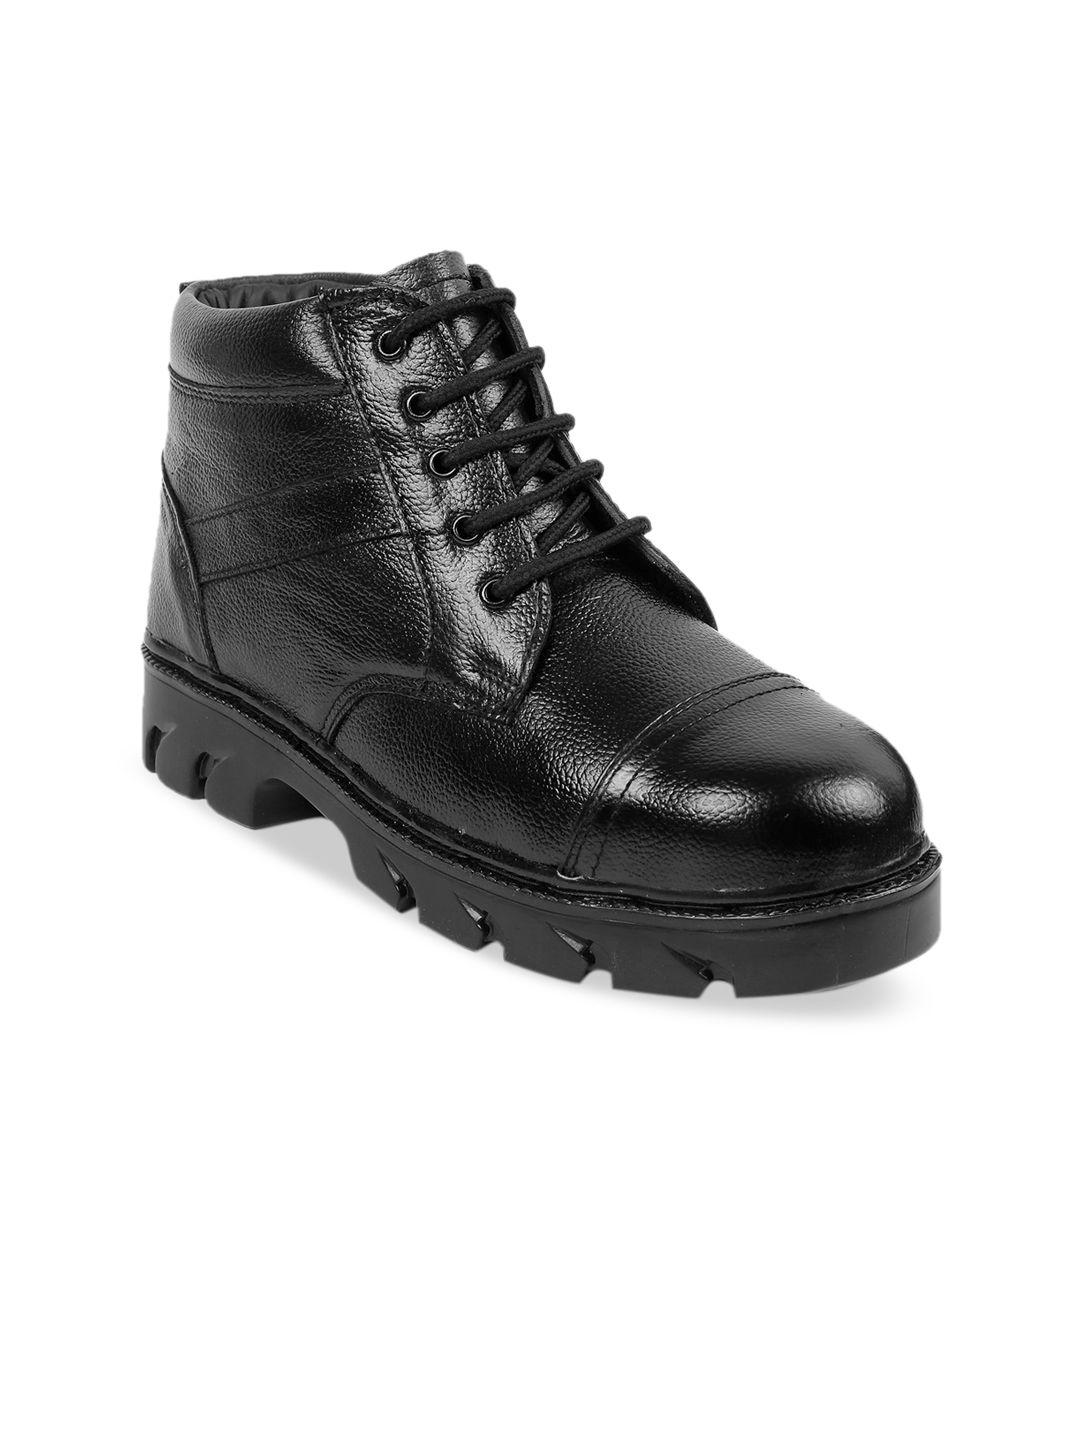 woakers men black solid synthetic leather mid-top flat boots